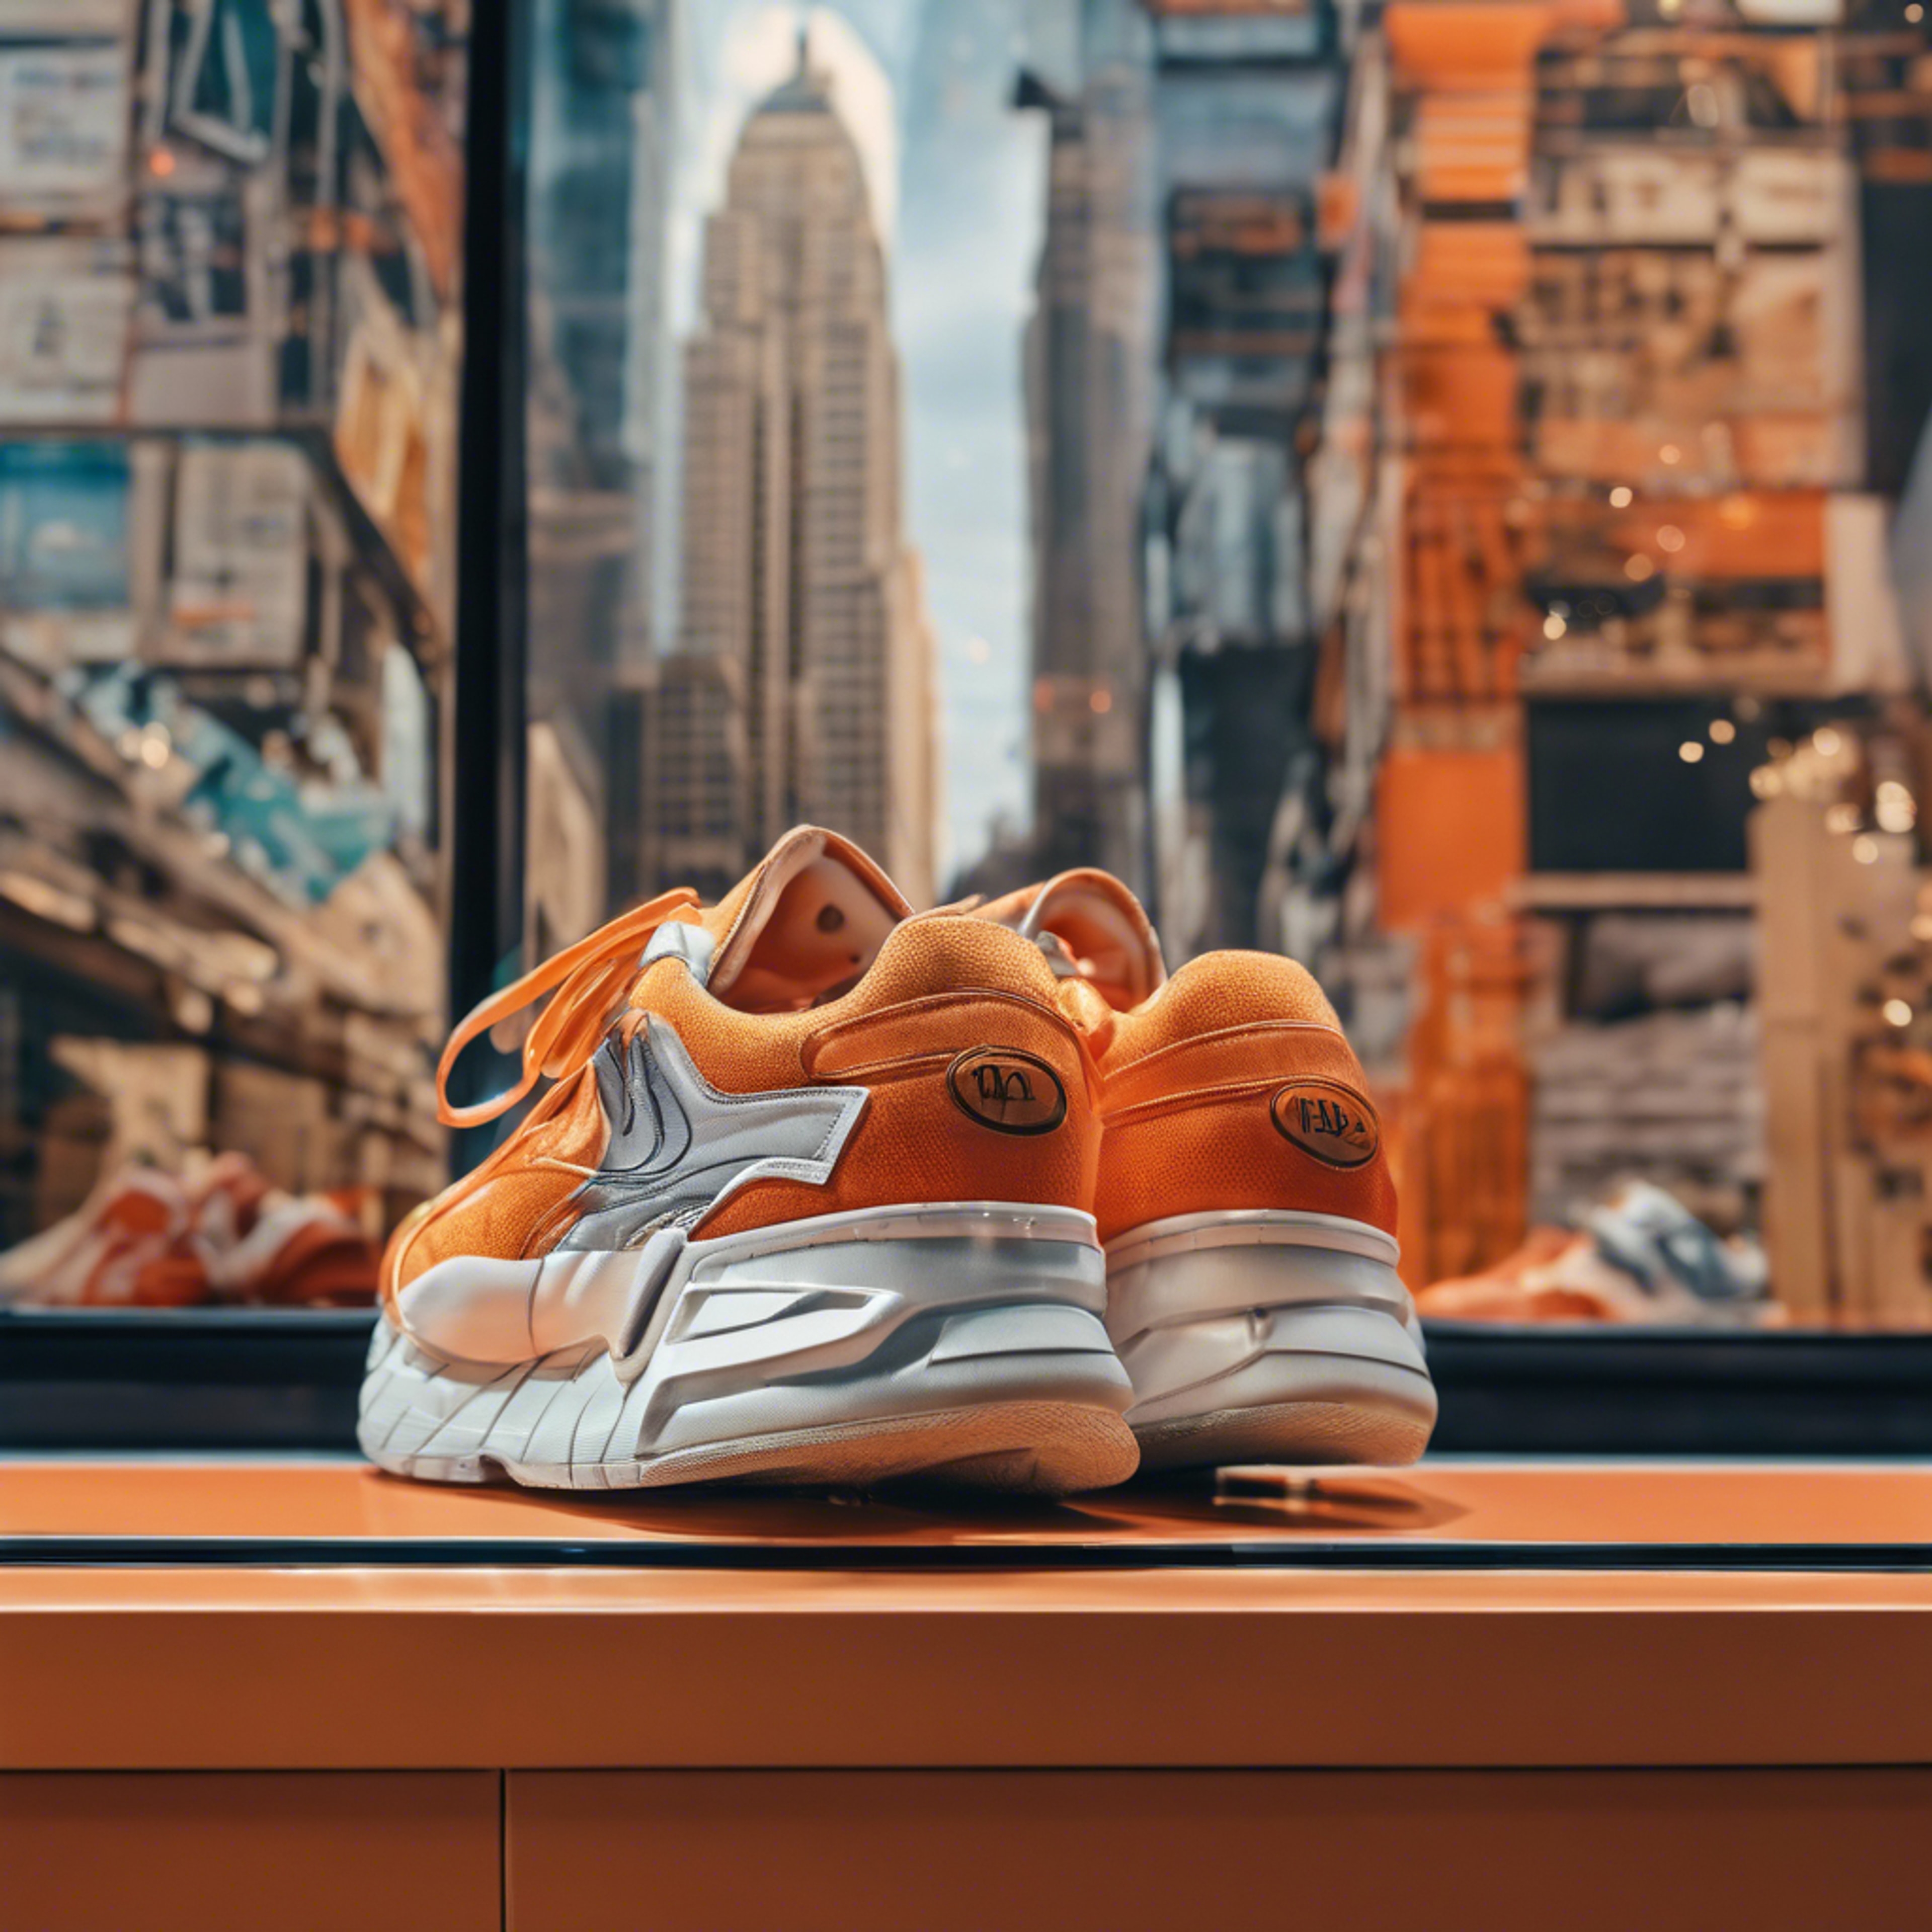 Orange Y2K-inspired sneakers displayed in a shoe store window with a retro cityscape backdrop. Kertas dinding[c42ef01953ac4184b365]